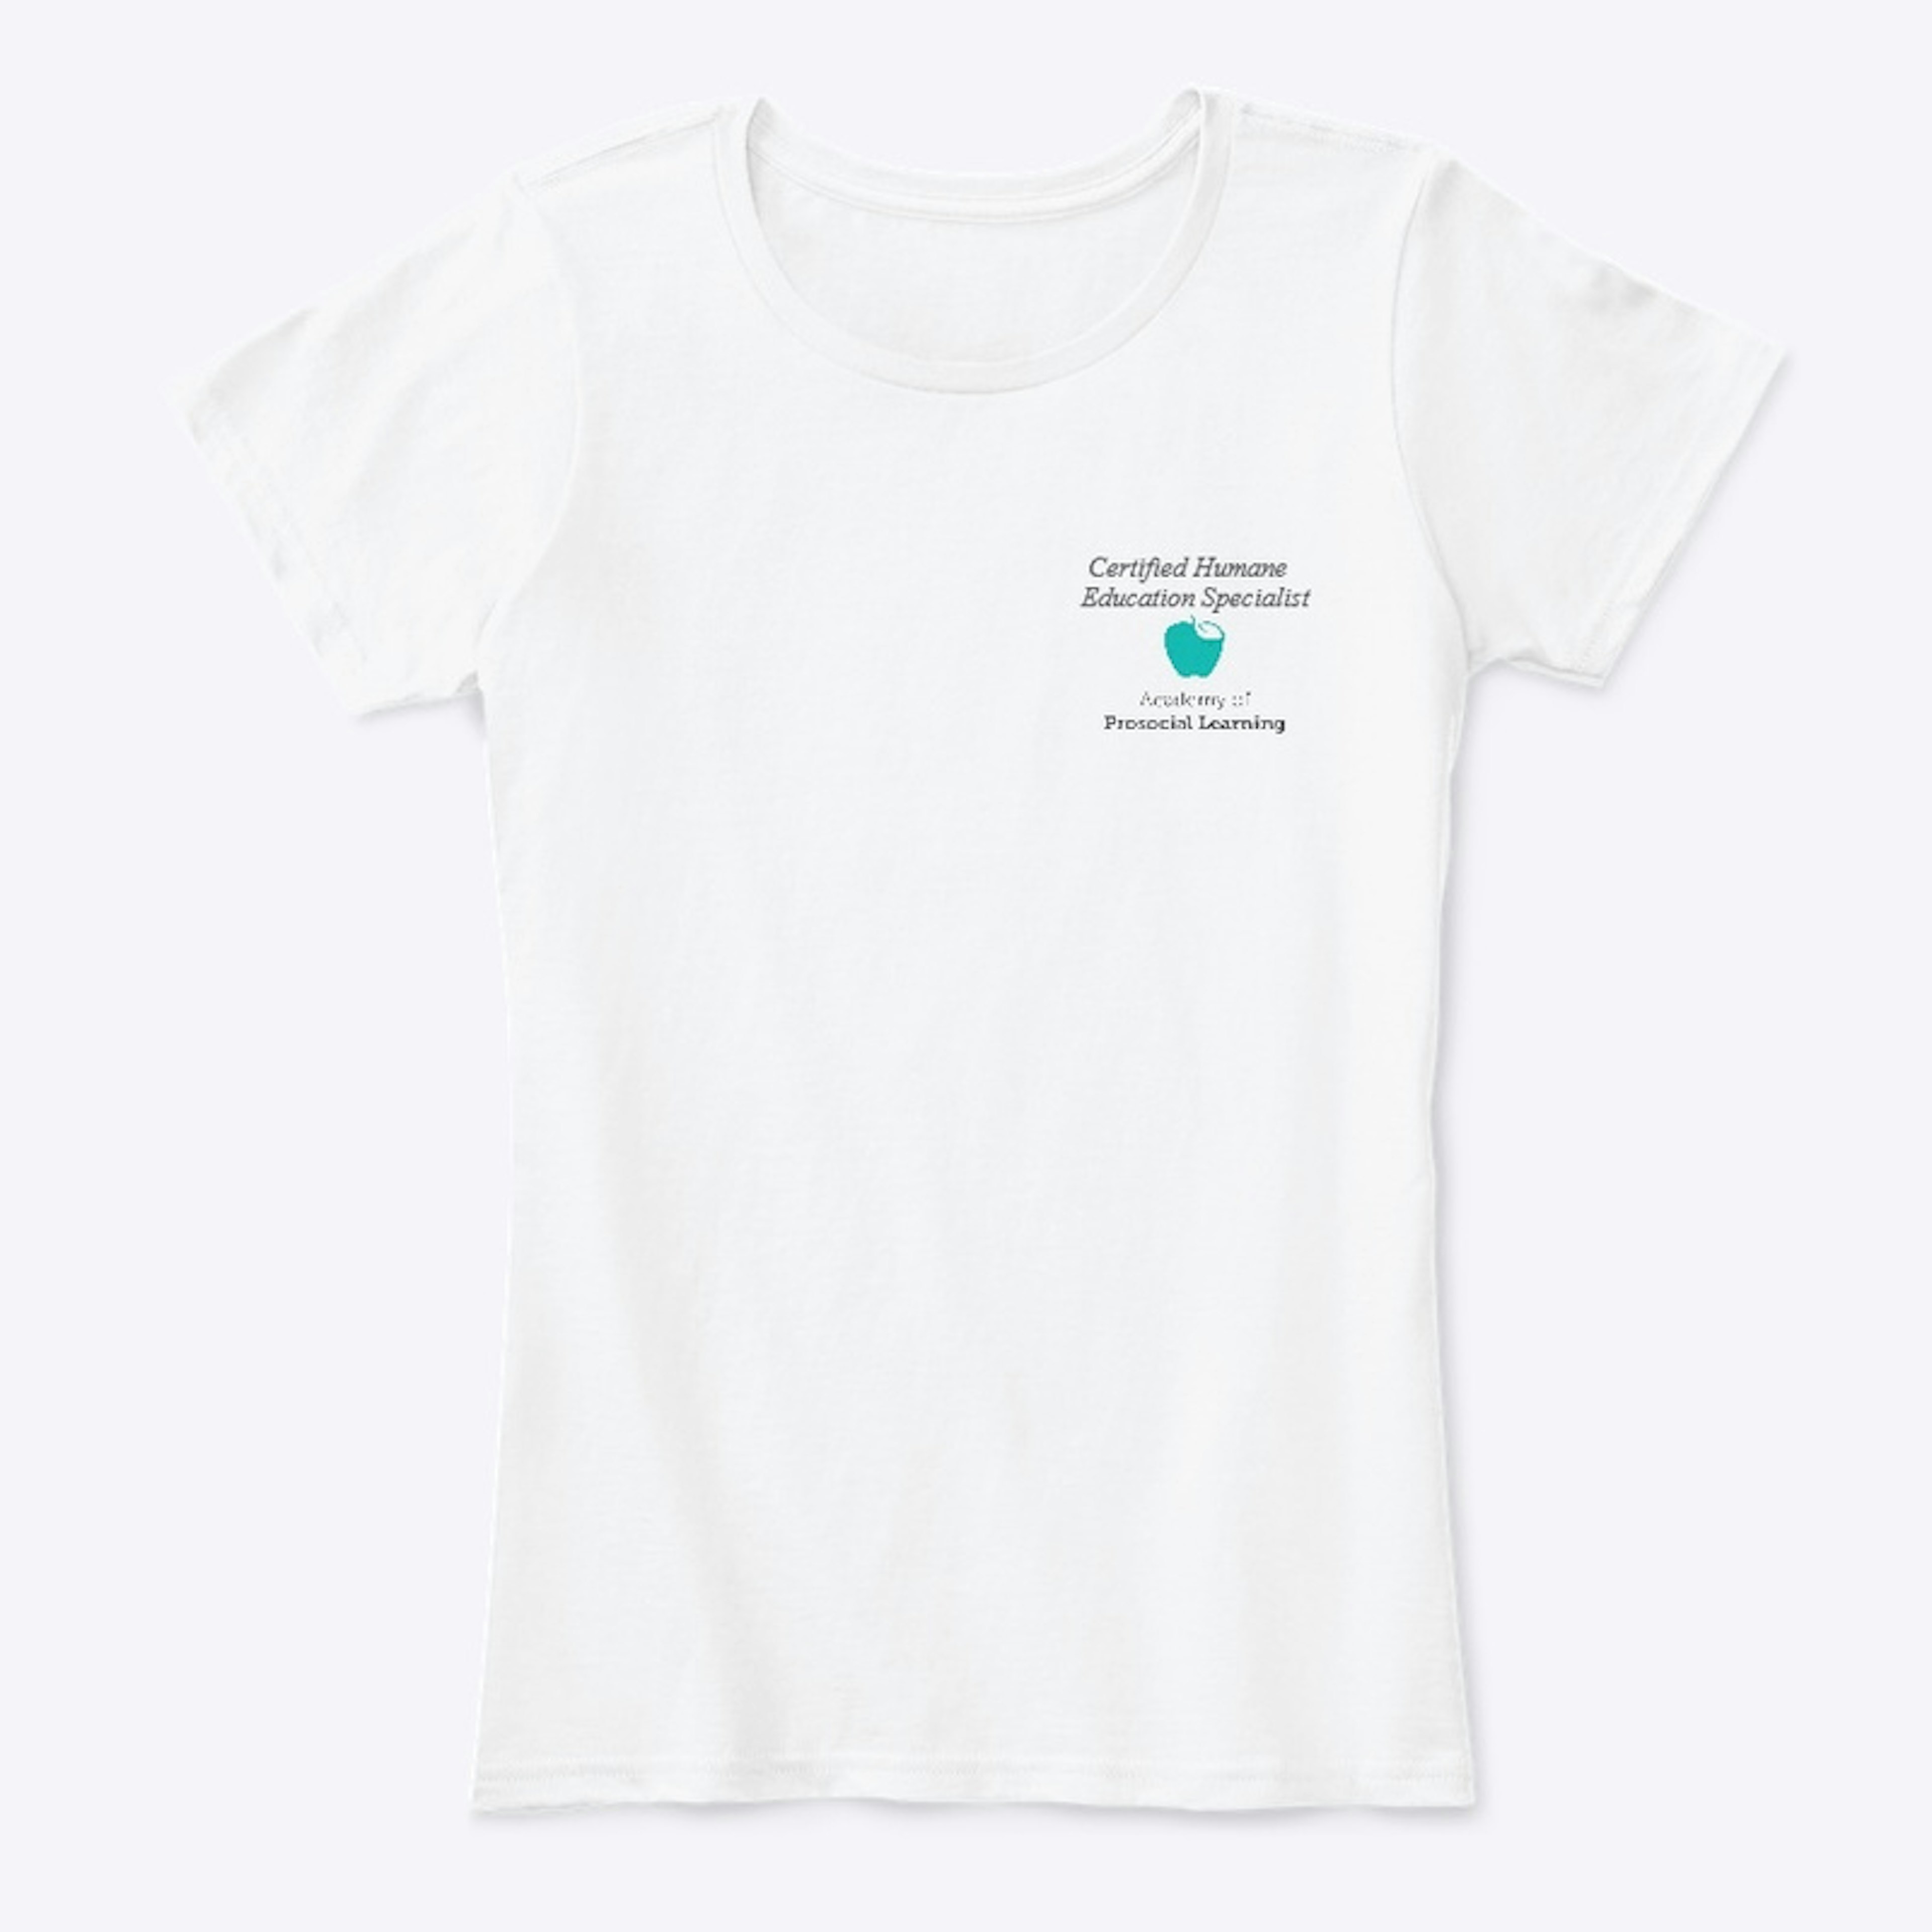 CHES graduate logo tee (fitted ladies)